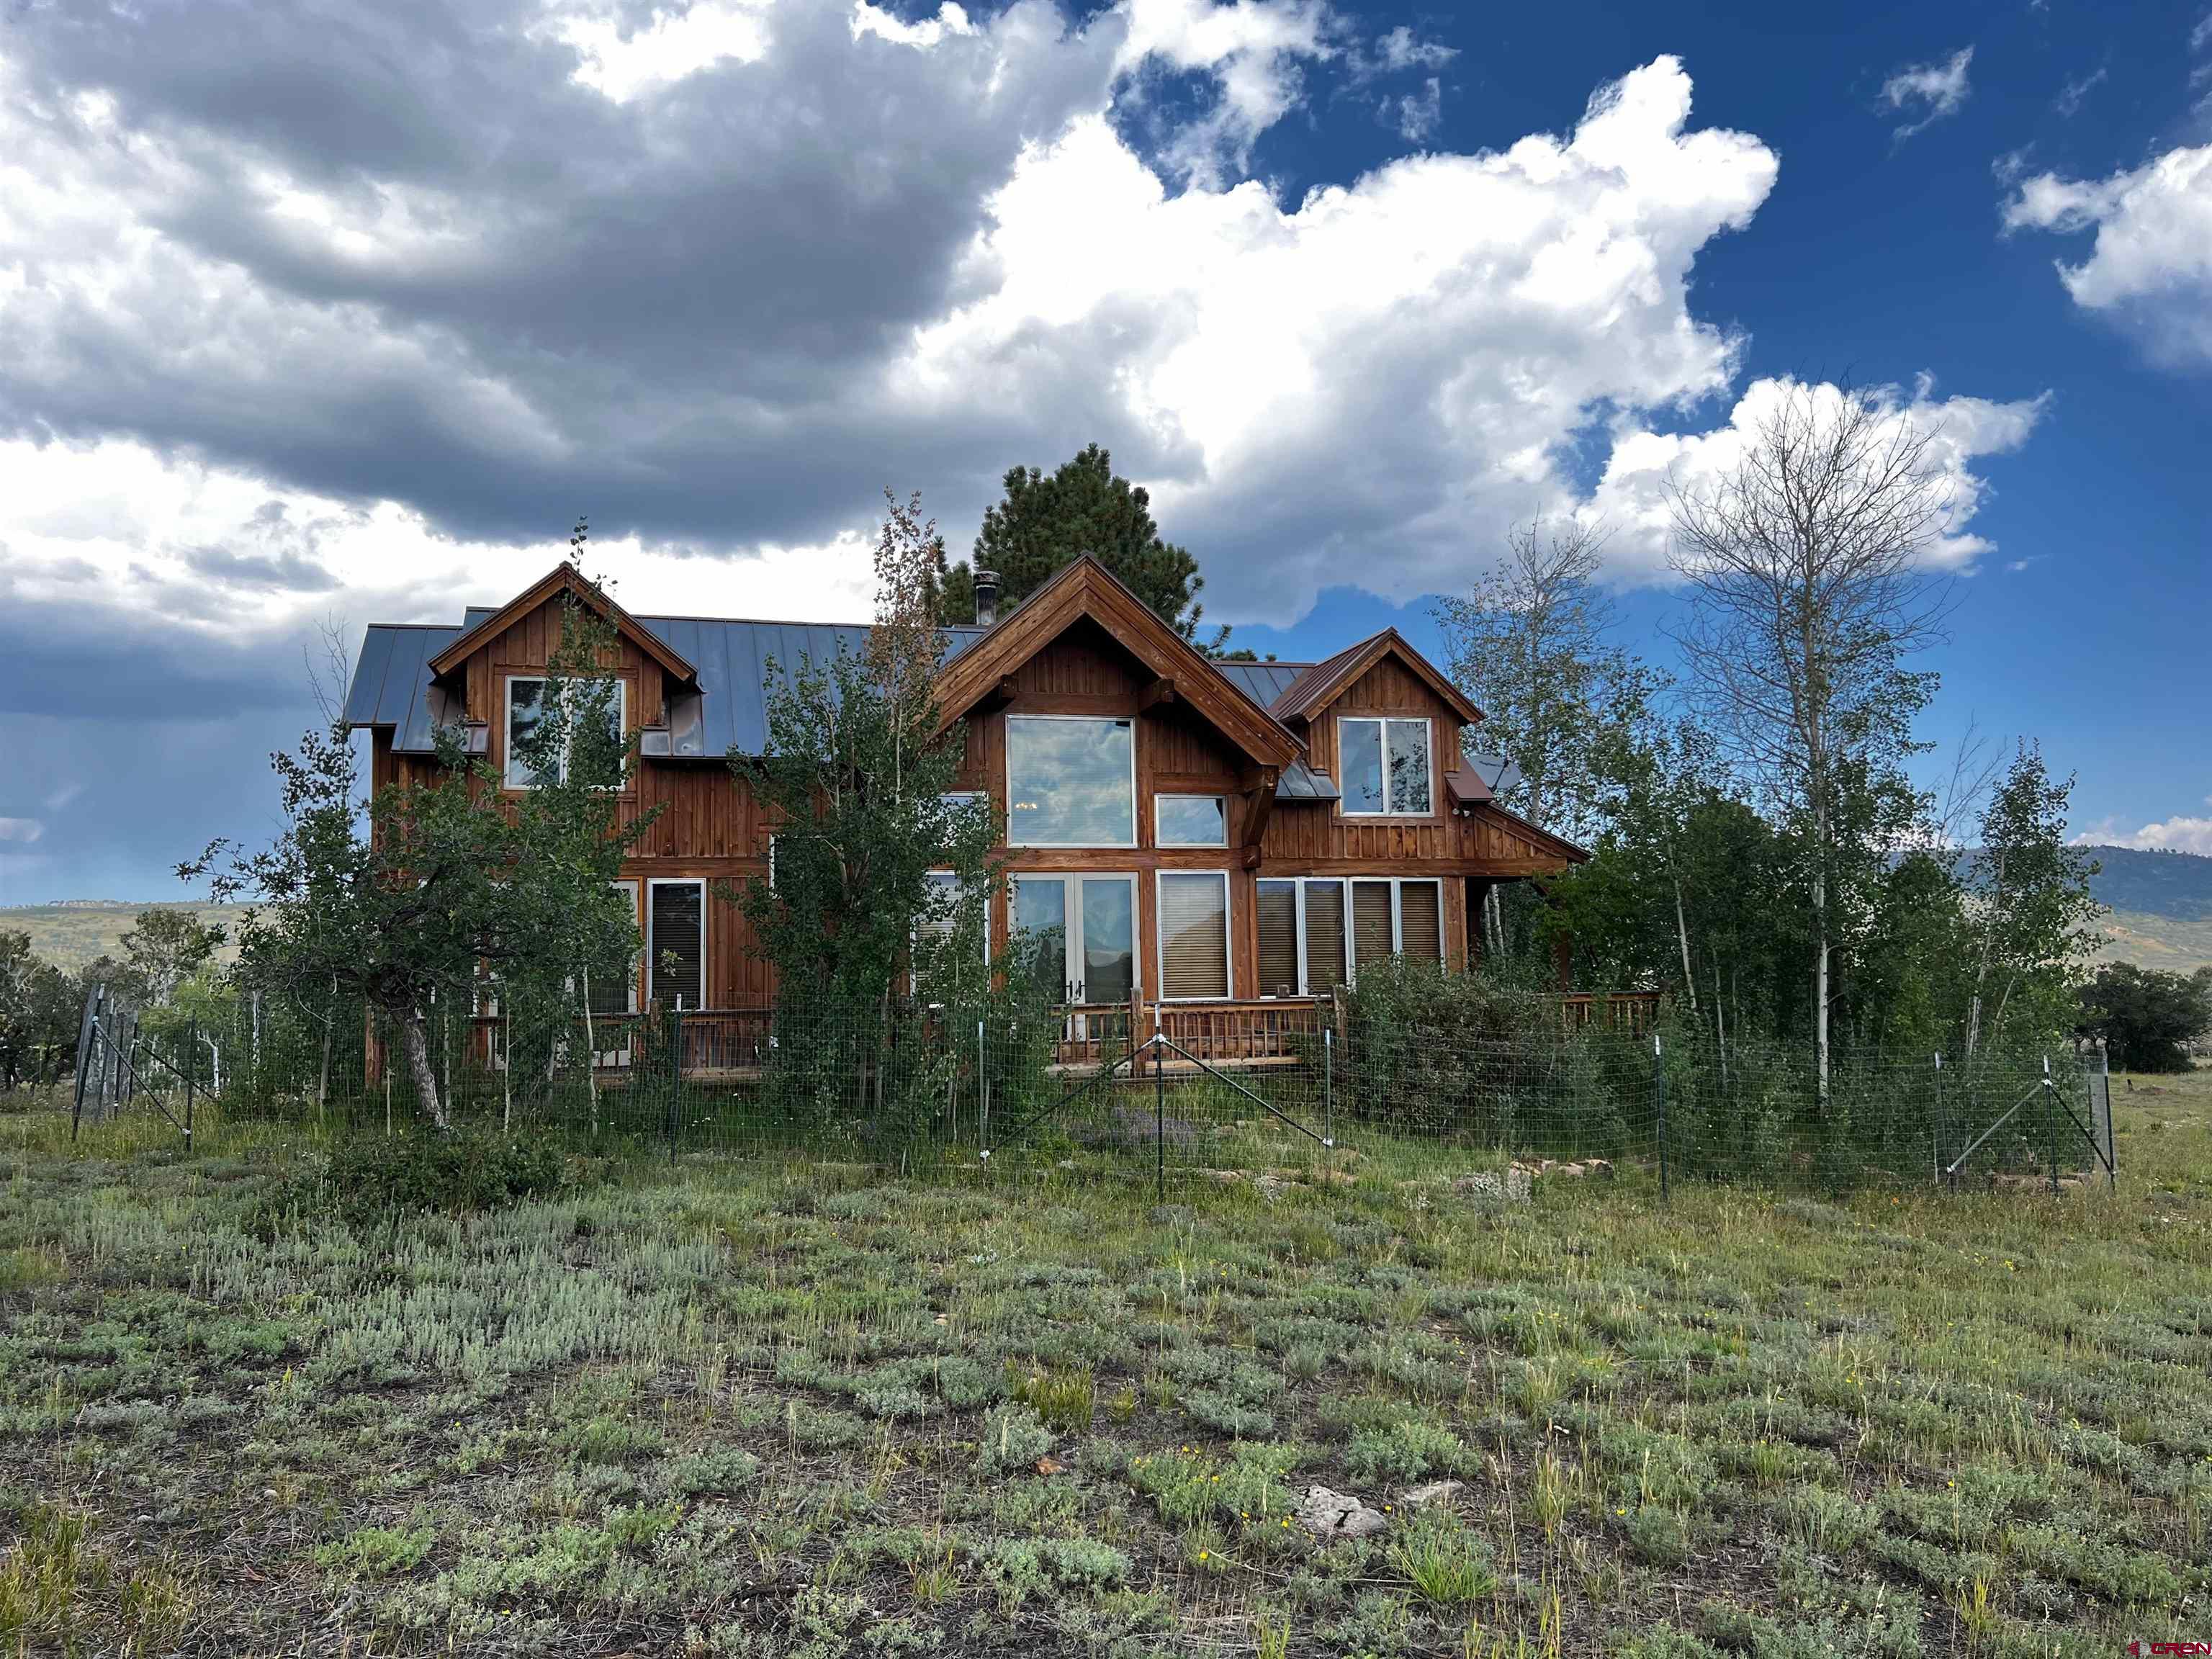 Comfortable and rustically elegant residence/ cabin situated atop one of the most pristine mesas in view of the majestic Sneffels Mountain Range. This offering consists of 6- 40-acre quarter section parcels that total roughly 244 acres. Located approximately 30 miles from Telluride and 17 miles from Ridgway. Spectacular meadows that open to unparalleled views. Seasonal surface ponds and a mix of trees and huge views. The timeless cabin is located in an ideal home site that takes in the beautiful Sneffels views, extraordinary sunsets and alpenglow. 2 bedrooms and a sleeping loft allows lots of room for family and/or friends. This is a rare opportunity for a spectacular legacy parcel.